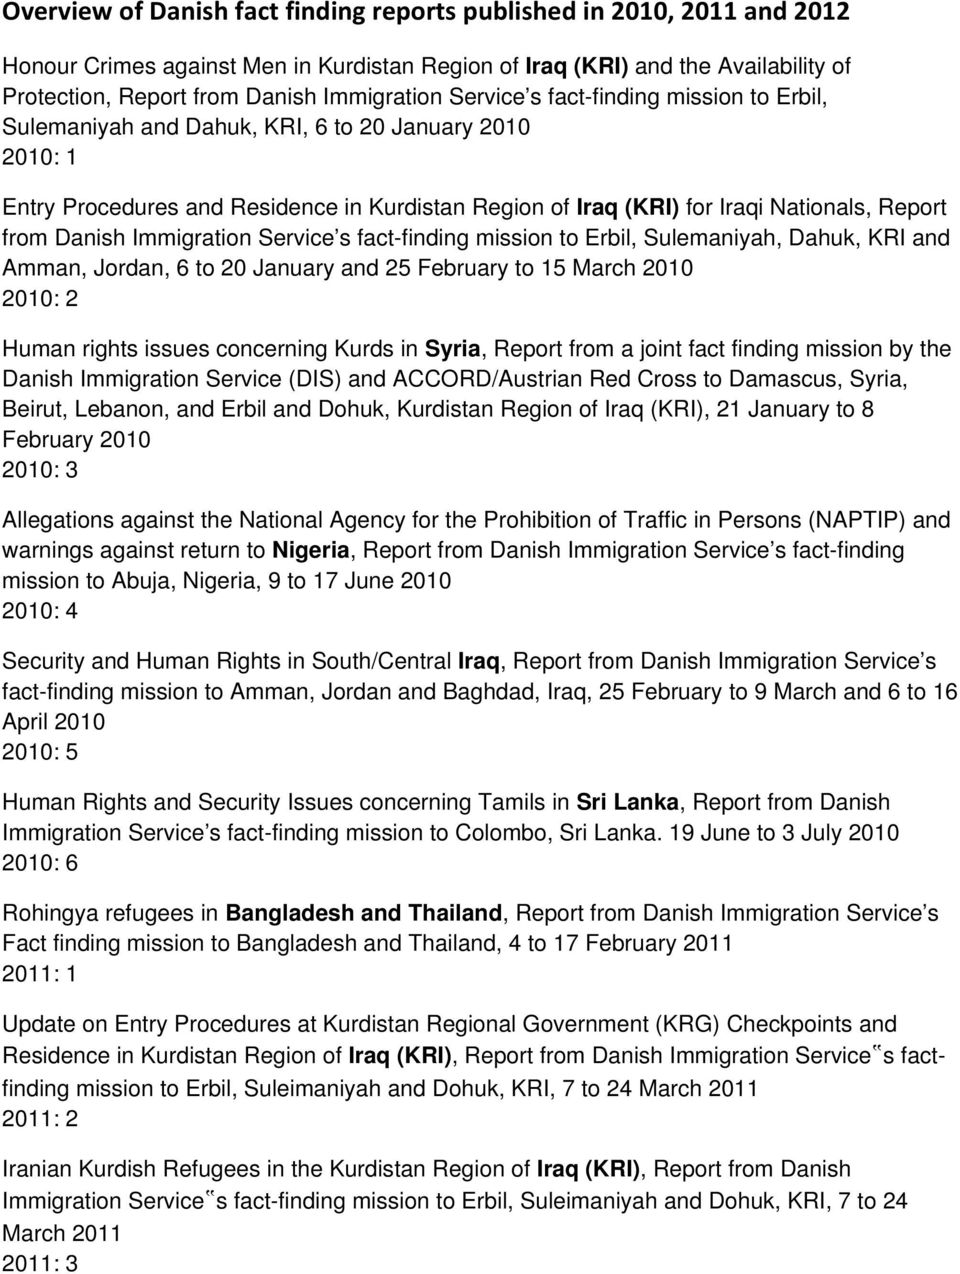 Danish Immigration Service s fact-finding mission to Erbil, Sulemaniyah, Dahuk, KRI and Amman, Jordan, 6 to 20 January and 25 February to 15 March 2010 2010: 2 Human rights issues concerning Kurds in